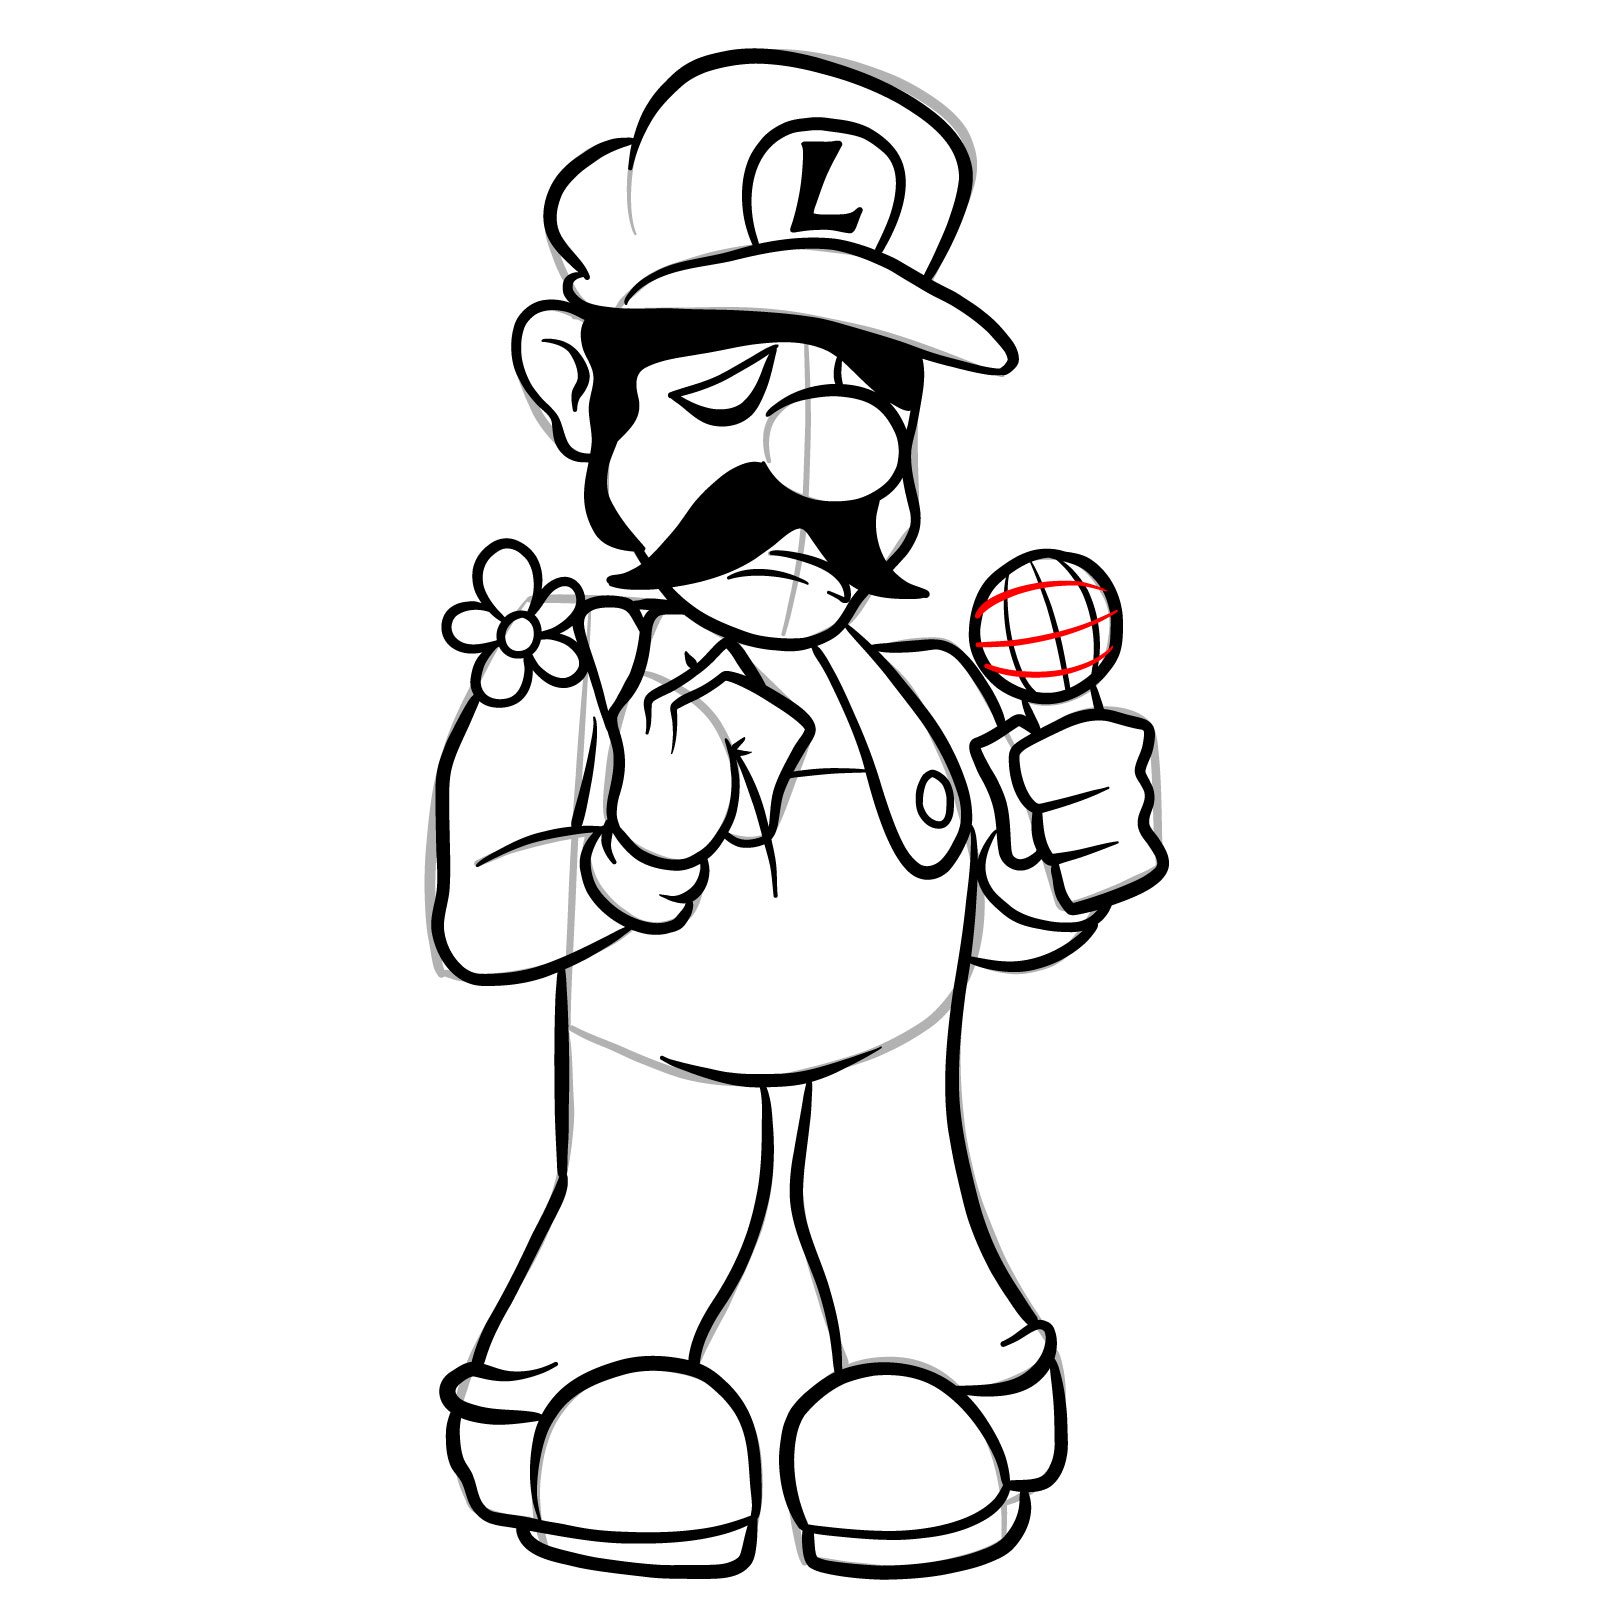 How to draw Beta Luigi from FNF - step 33